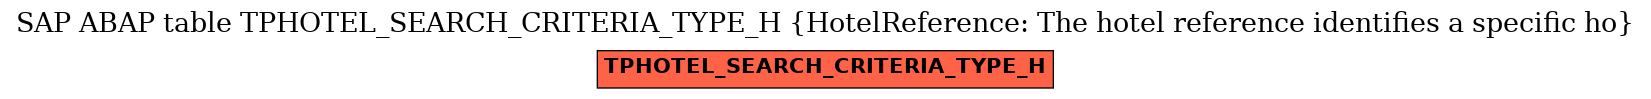 E-R Diagram for table TPHOTEL_SEARCH_CRITERIA_TYPE_H (HotelReference: The hotel reference identifies a specific ho)